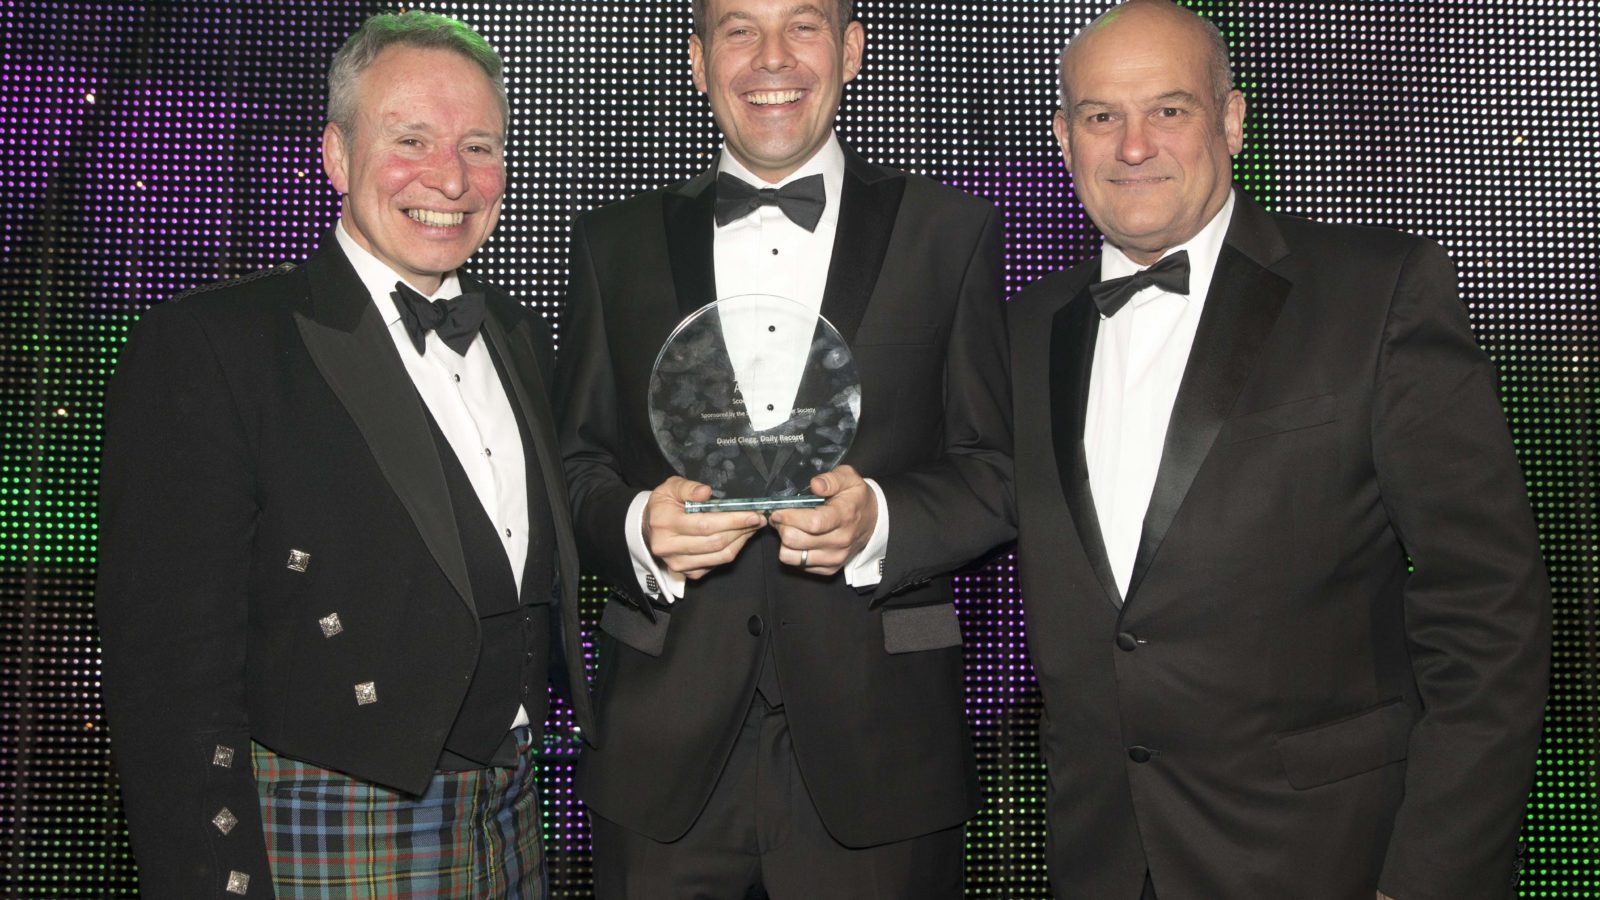 Scoop of the Year
Sponsored by the Scottish Newspaper Society - @scotnewssociety
Winner
David Clegg, Daily Record